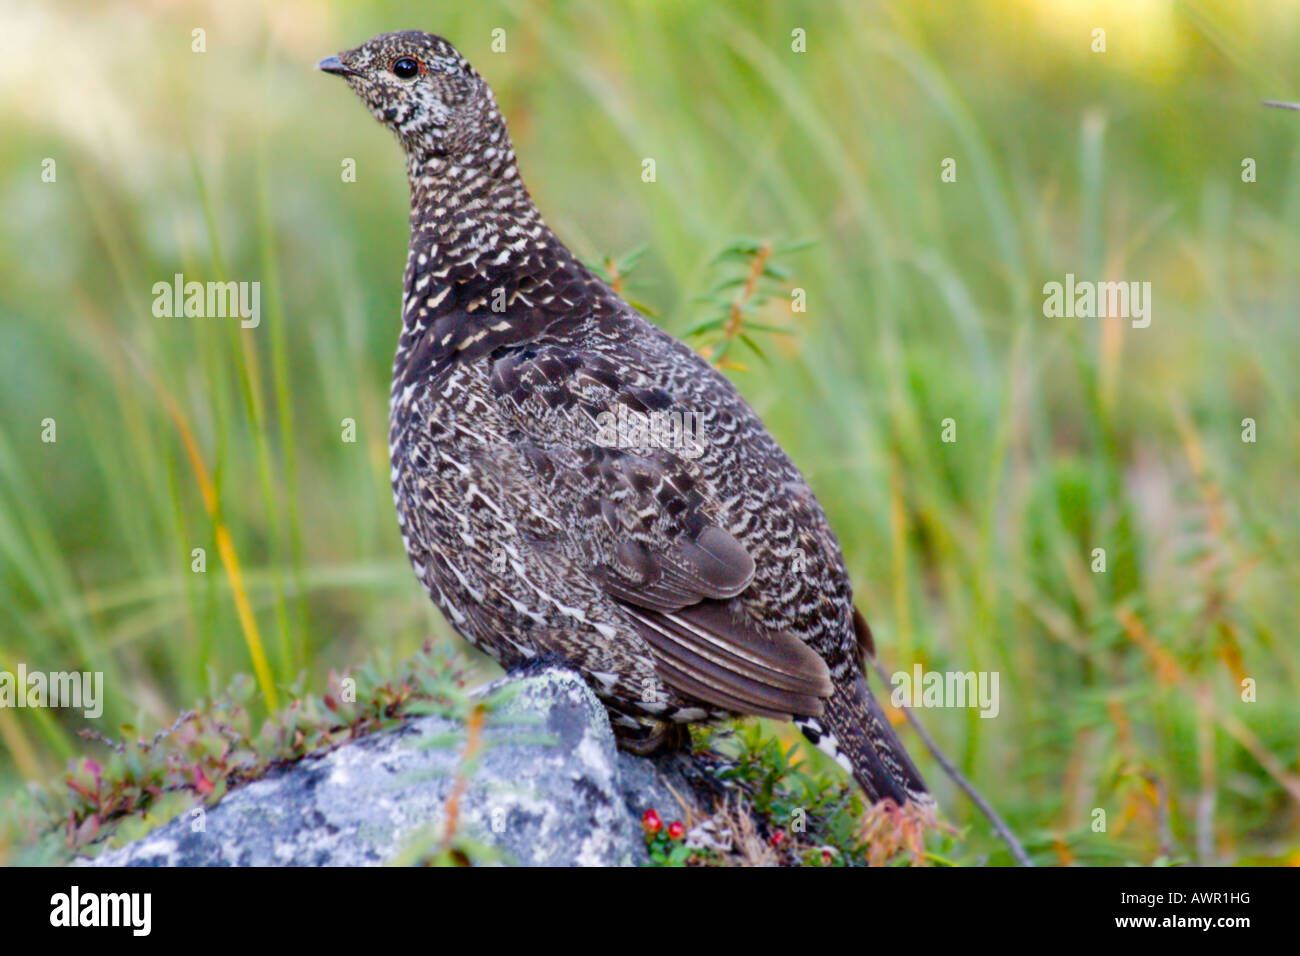 Willow Grouse or Willow Ptarmigan (Lagopus lagopus) hen in summer plumage standing on a rock, Yukon Territory, Canada Stock Photo